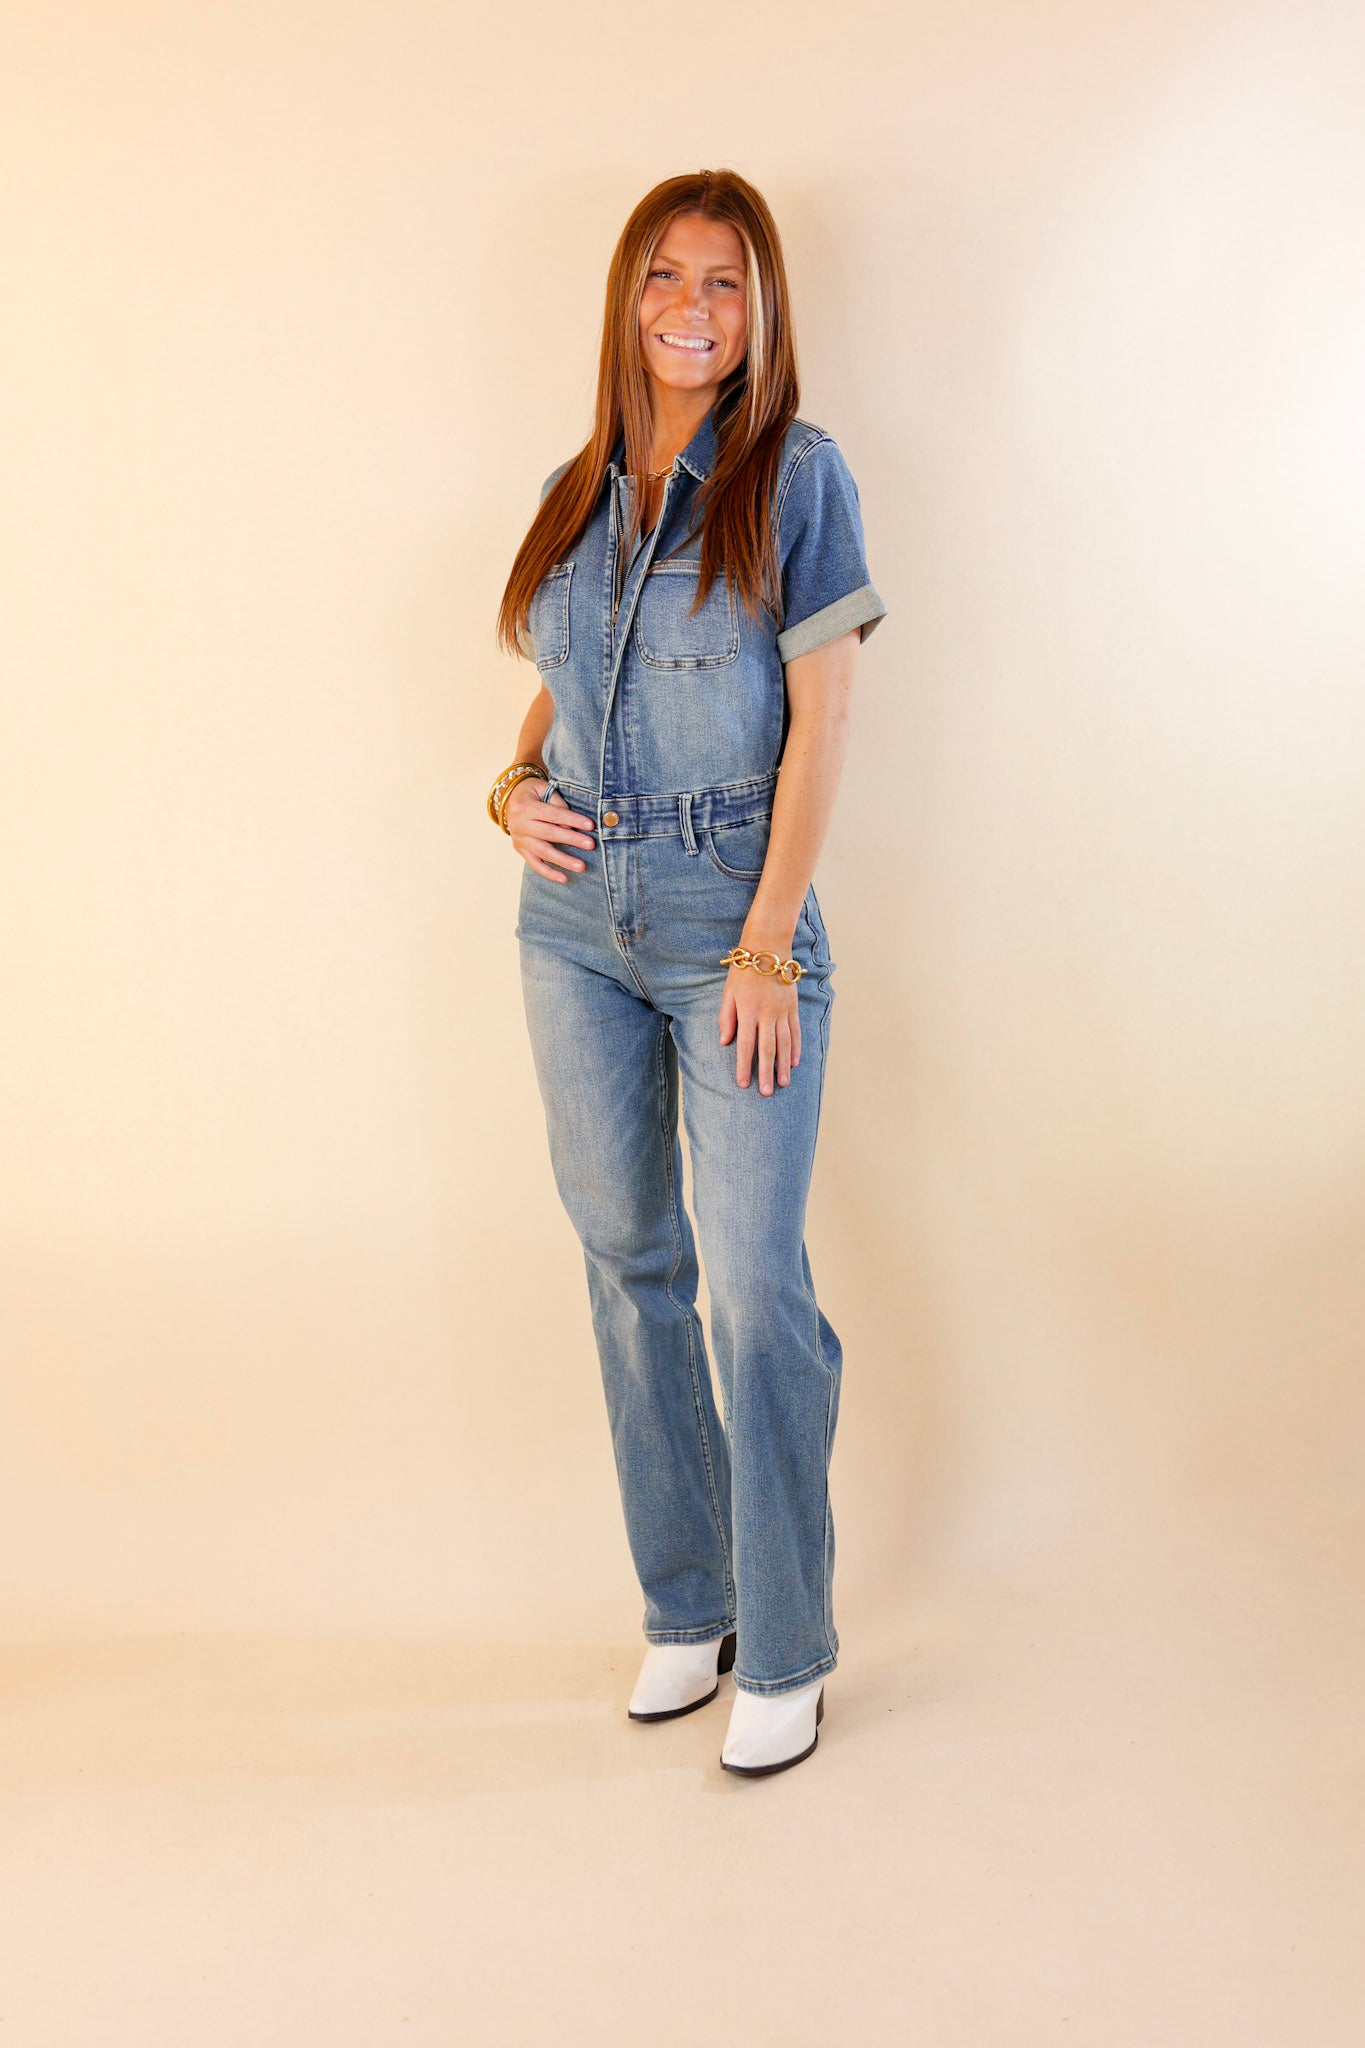 Judy Blue | New To The City Short Sleeve Denim Jumpsuit in Medium Wash